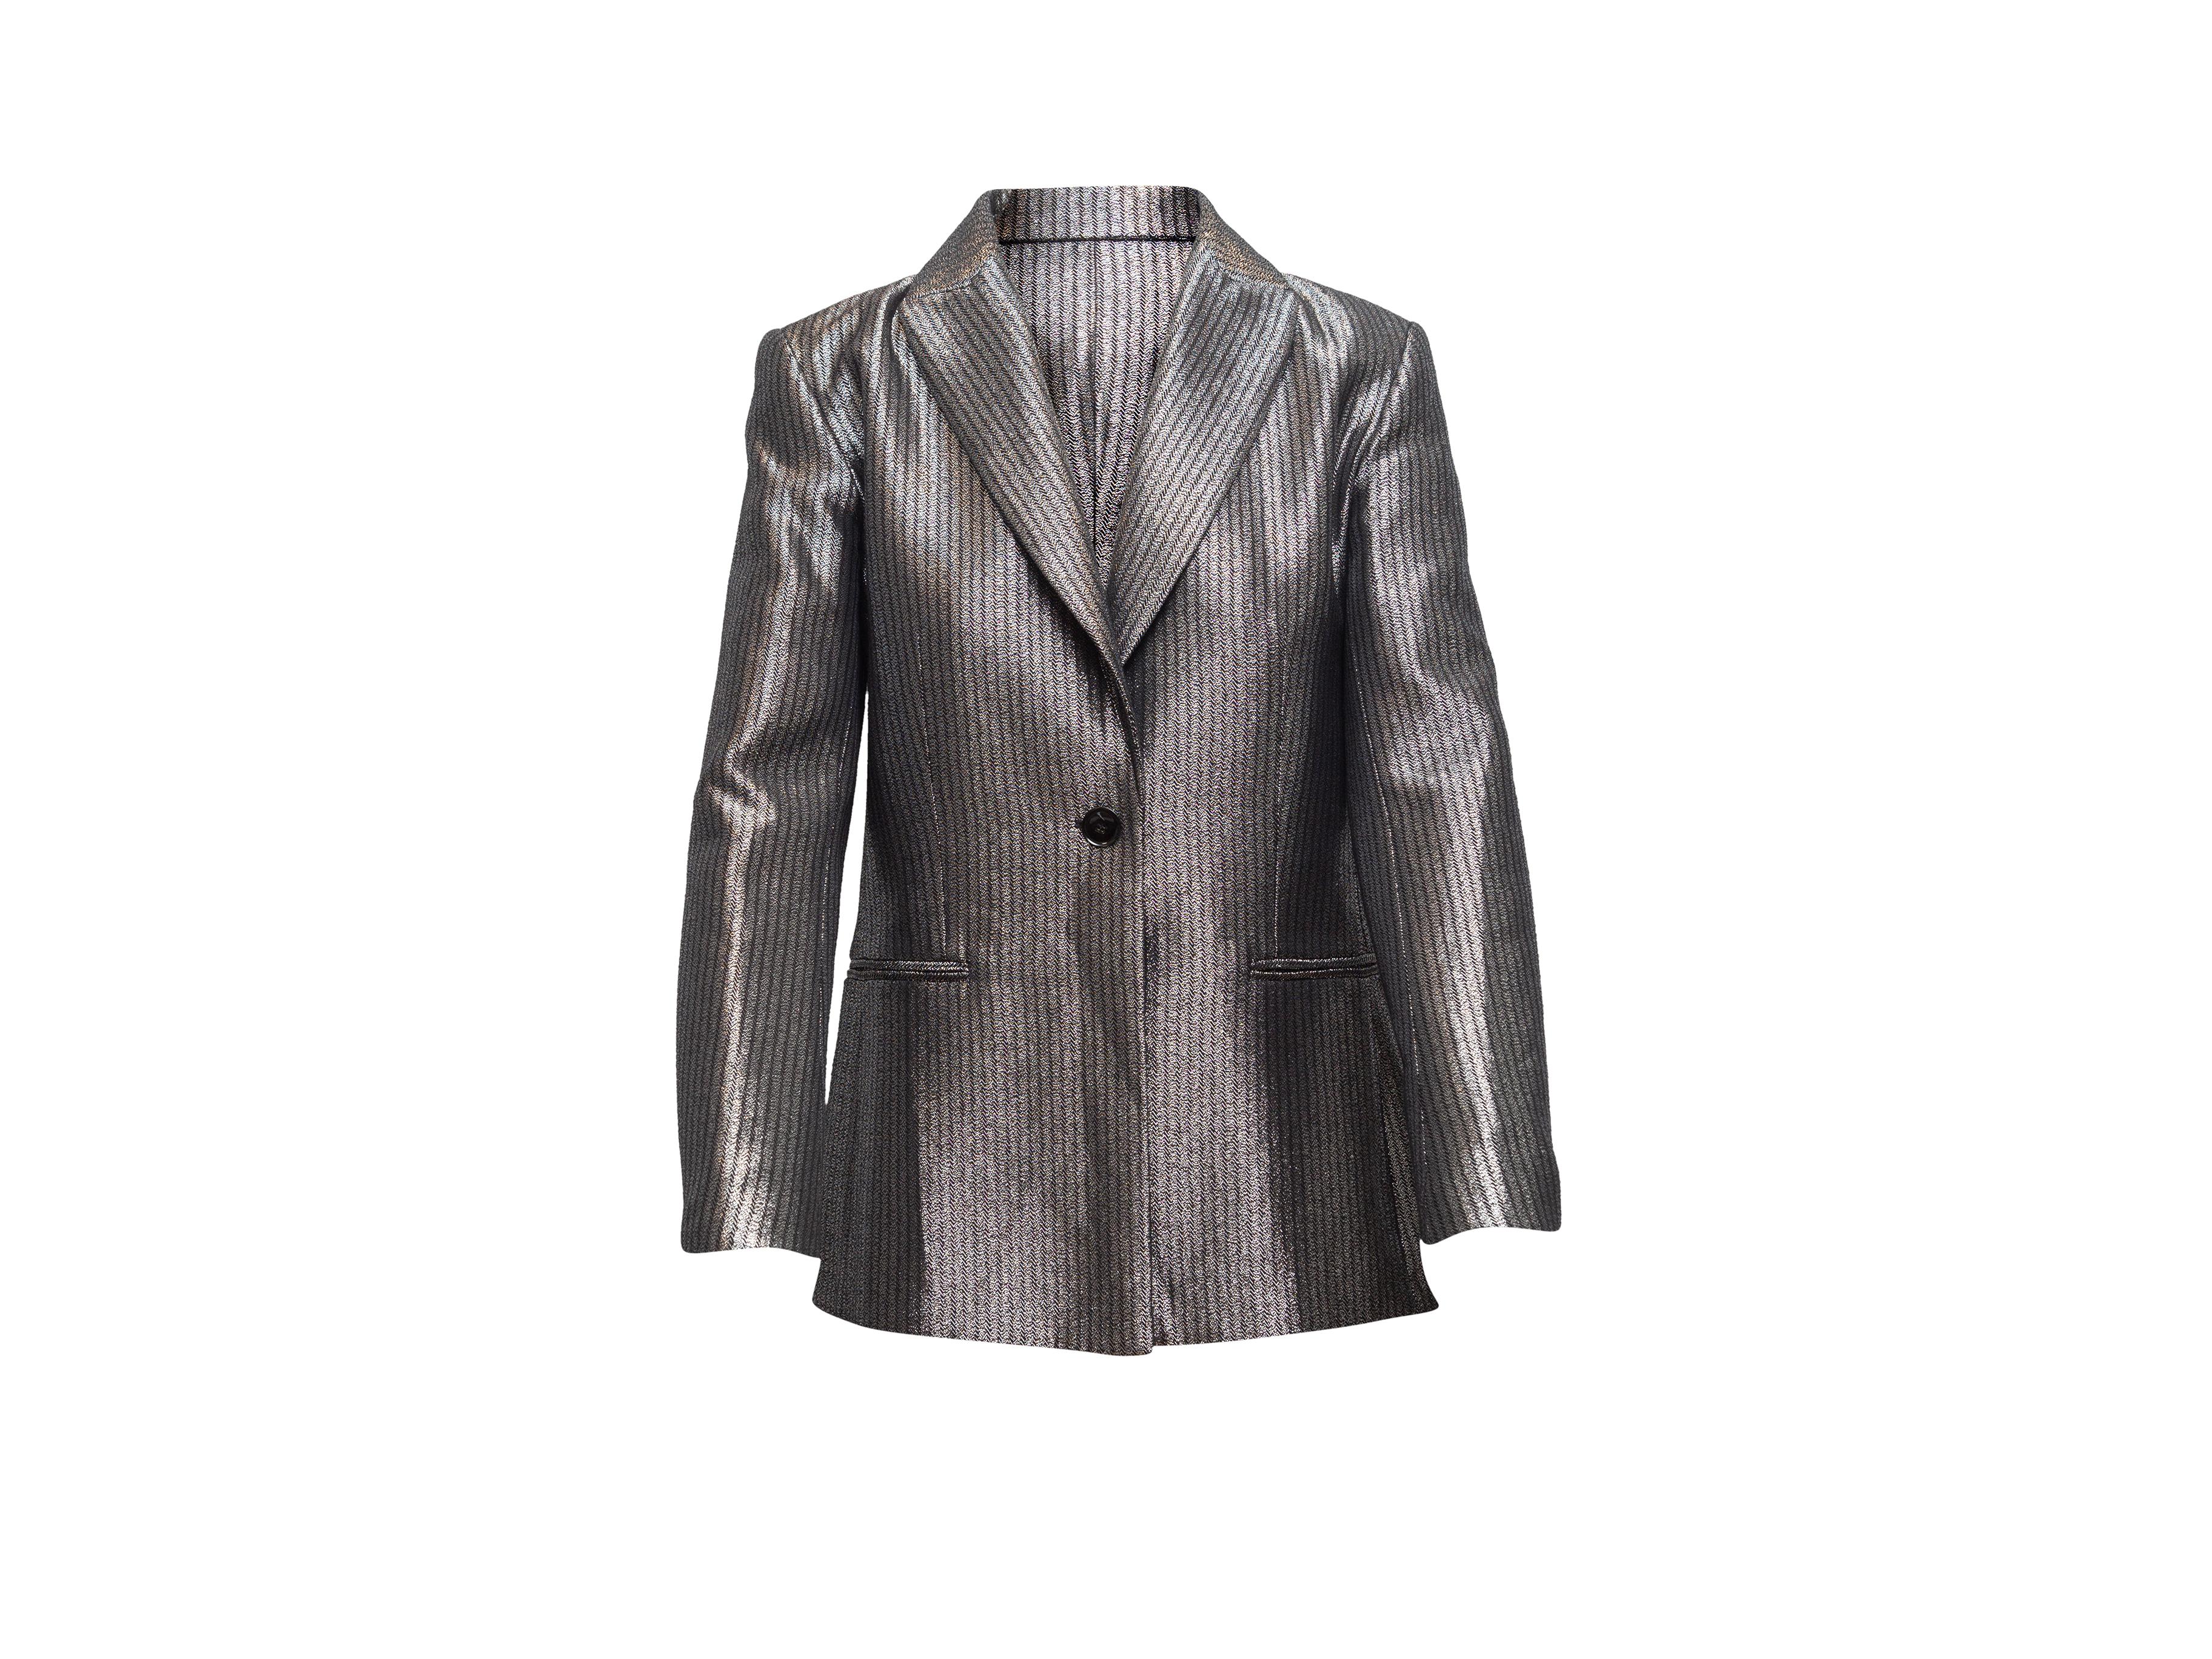 Product details: Silver metallic pinstriped blazer by Maje. Notched lapel. Dual welt pockets at hips. Single button closure at front. Designer size 36. 32